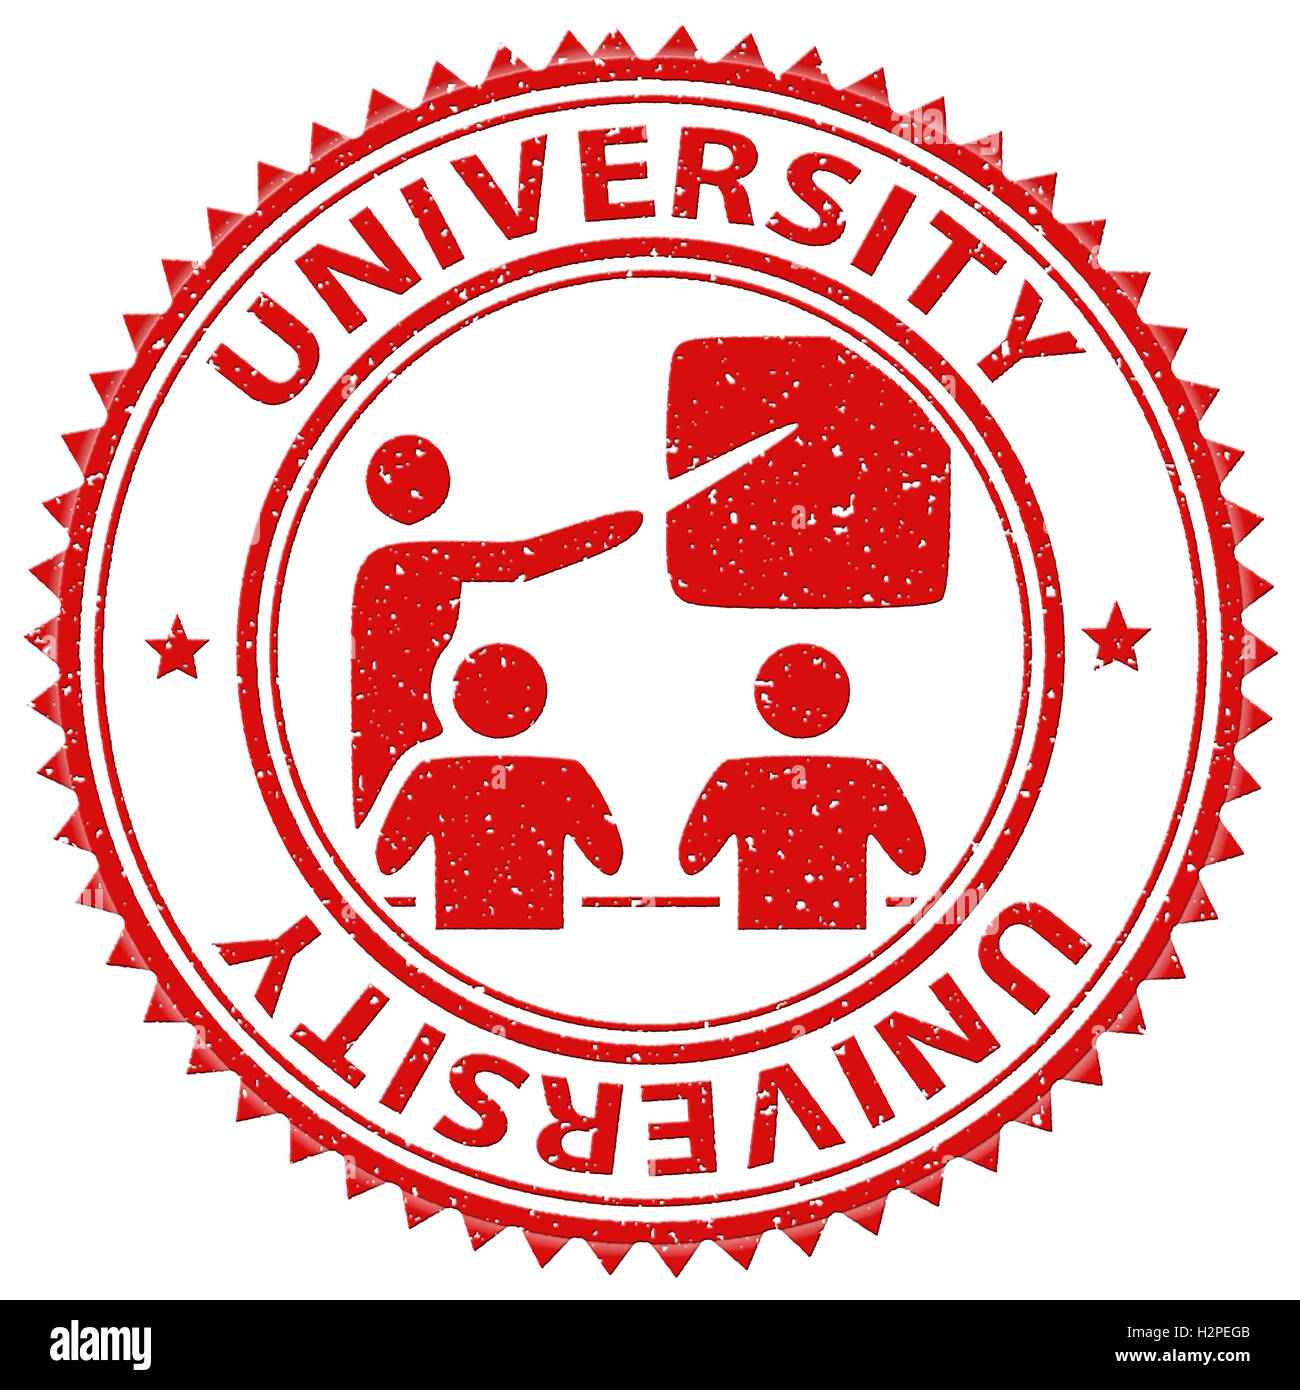 University Stamp Meaning Educational Establishment And Academy Stock Photo